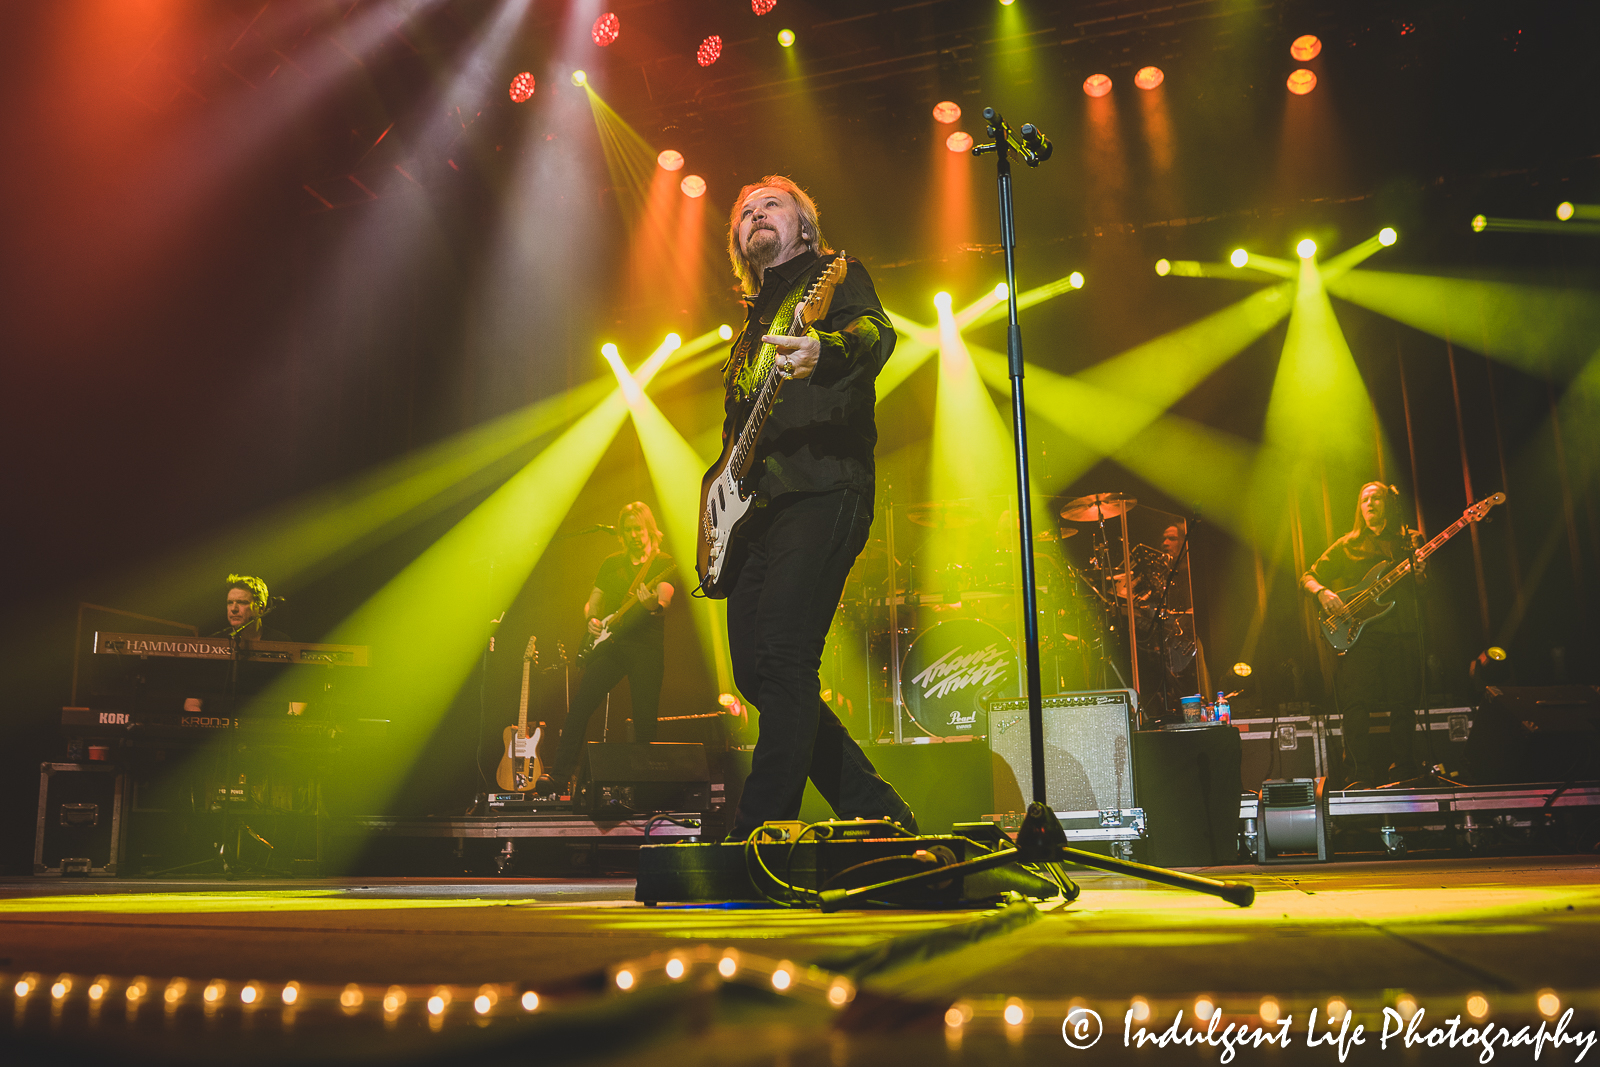 Travis Tritt scanning the crowd as he performed live in concert at Star Pavilion inside of Ameristar Casino in Kansas City, MO on December 3, 2021.